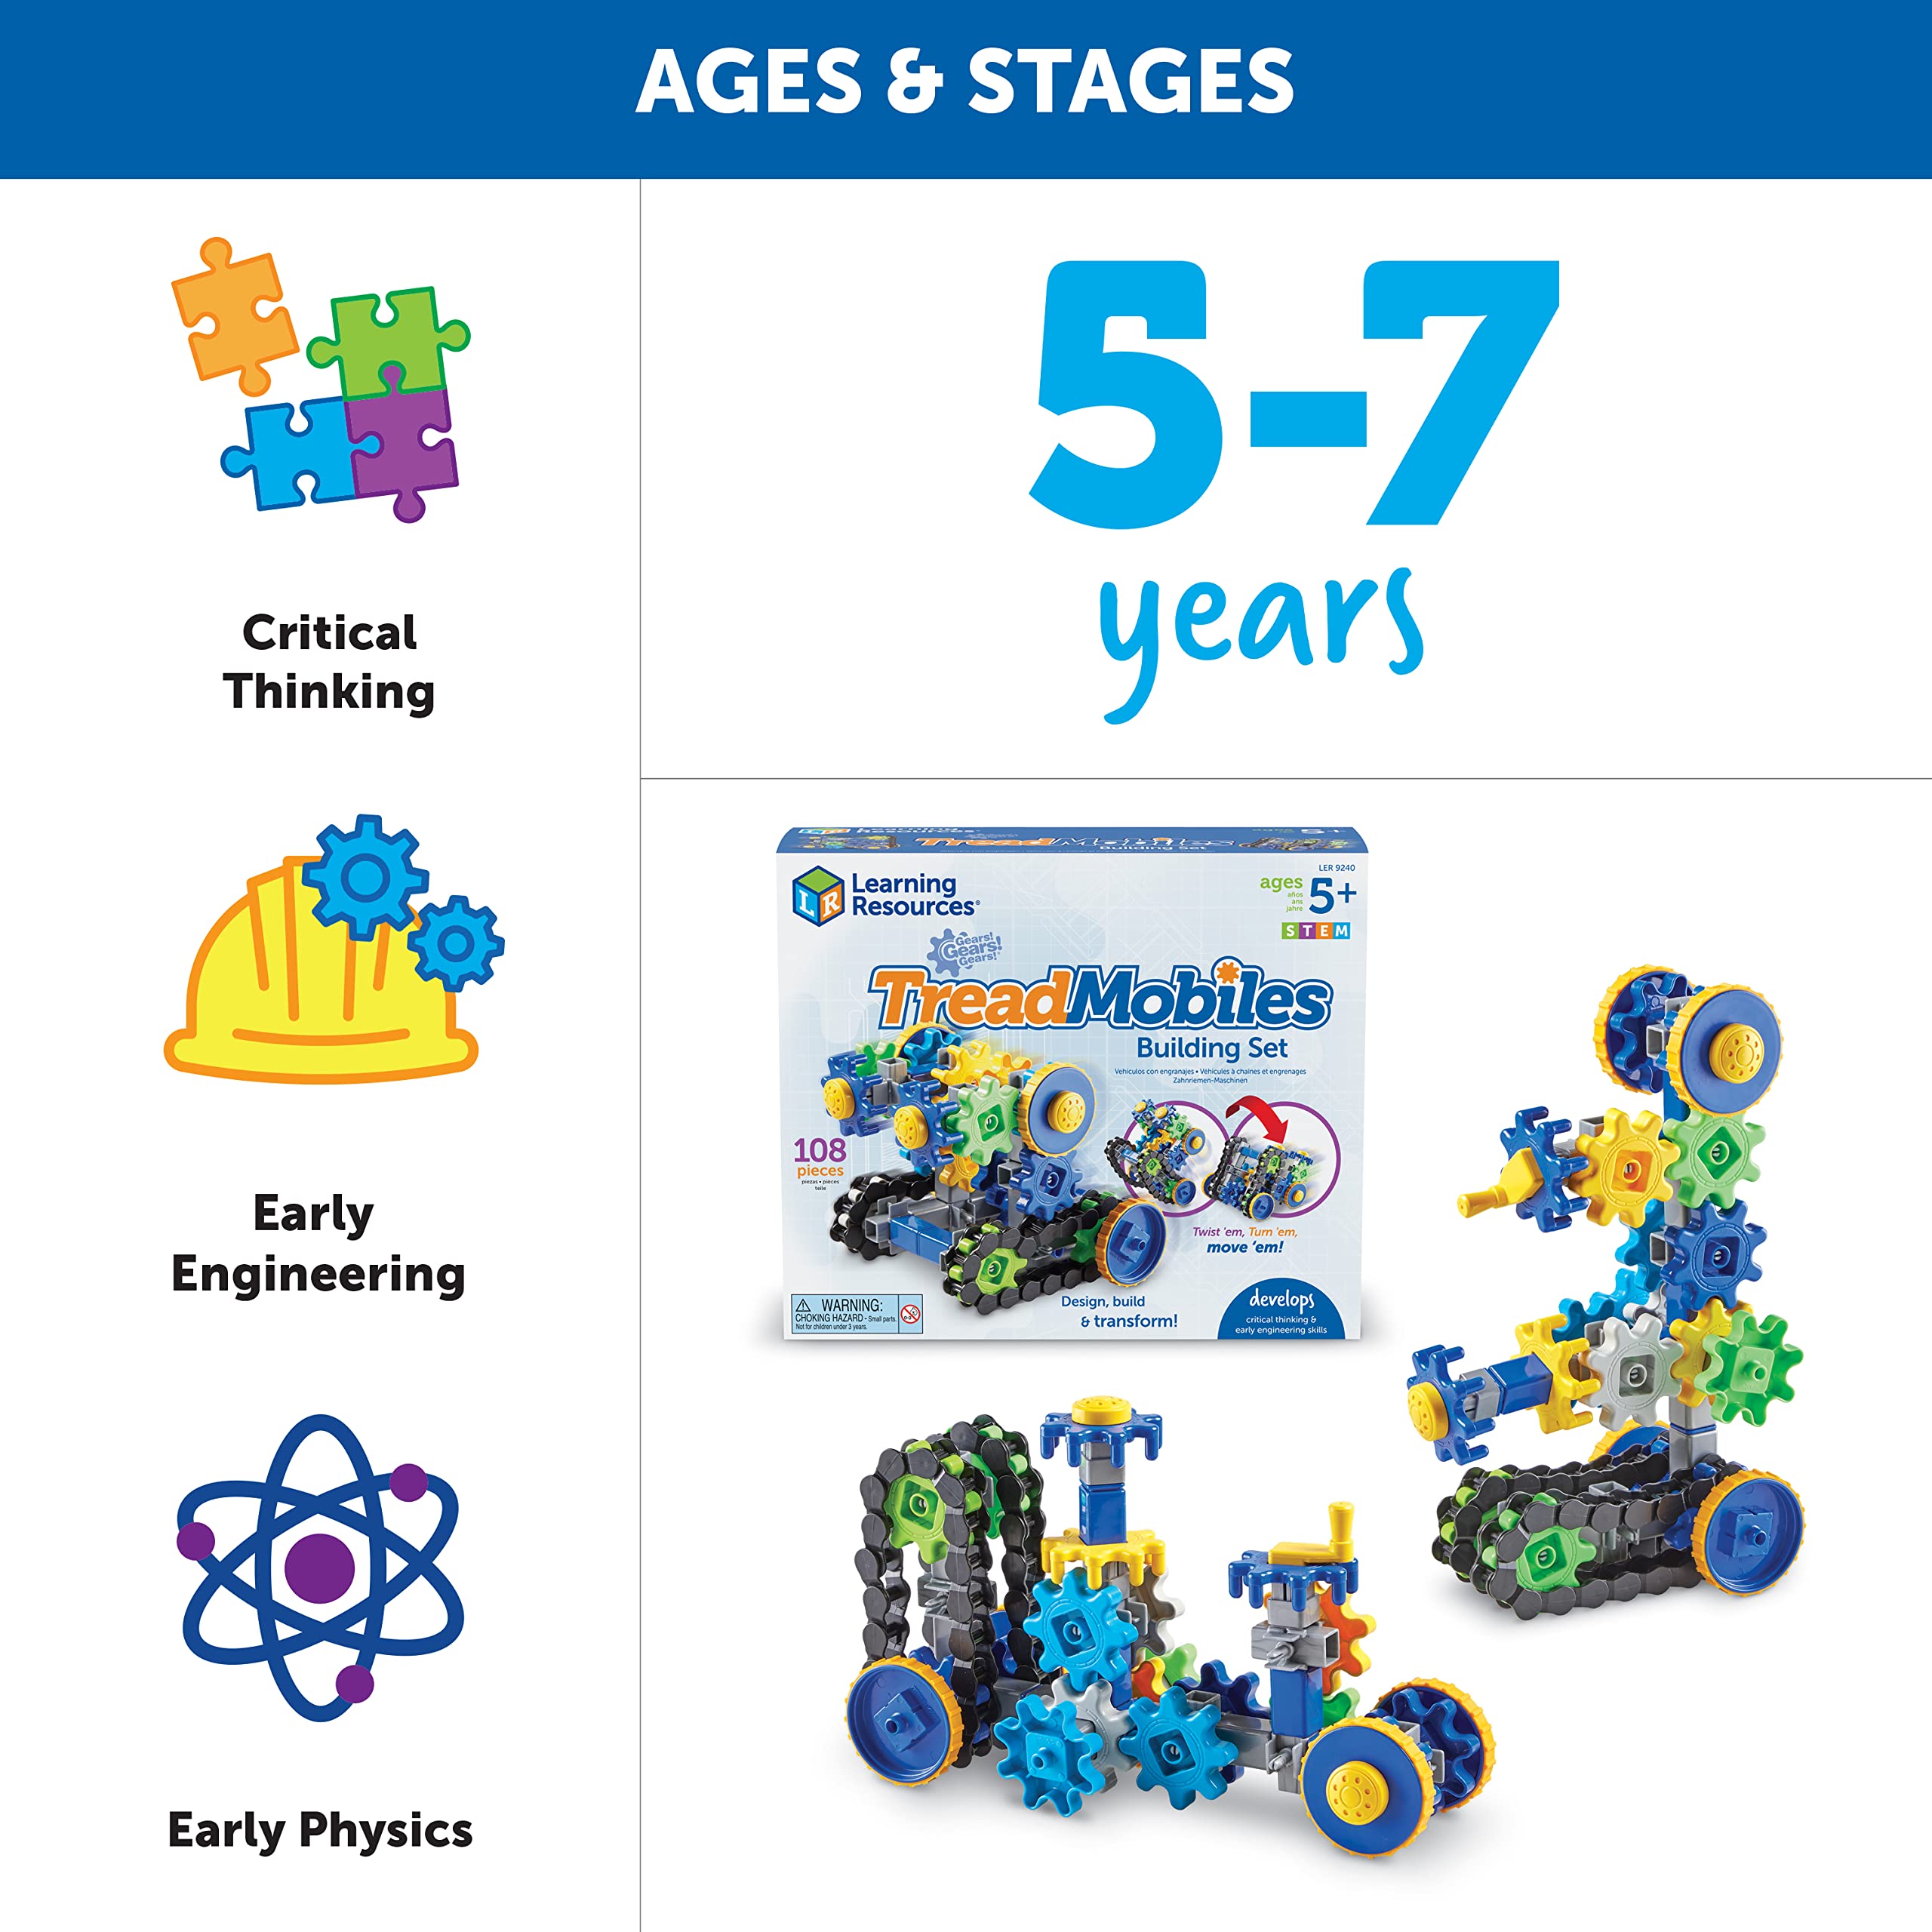 Learning Resources Gears! Gears! Gears! Treadmobiles Building Set, STEM Toys, Develops Early Engineering Skills, 108 Pieces, Ages 5+